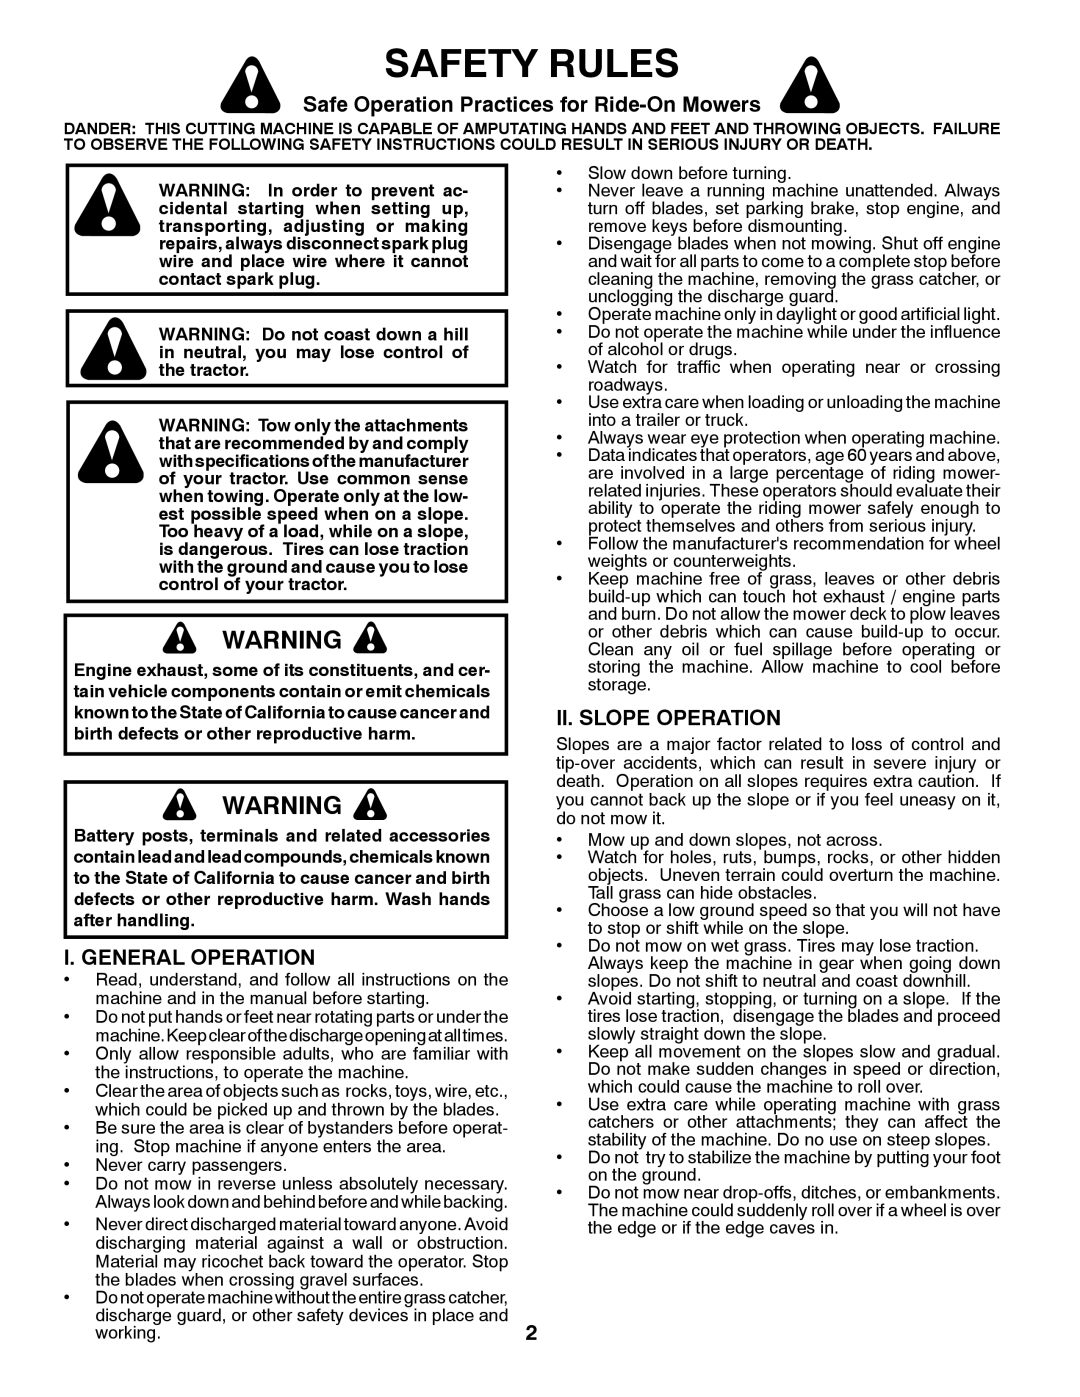 Husqvarna 96045000503 Safety Rules, Safe Operation Practices for Ride-On Mowers, I. General Operation, Ii. Slope Operation 